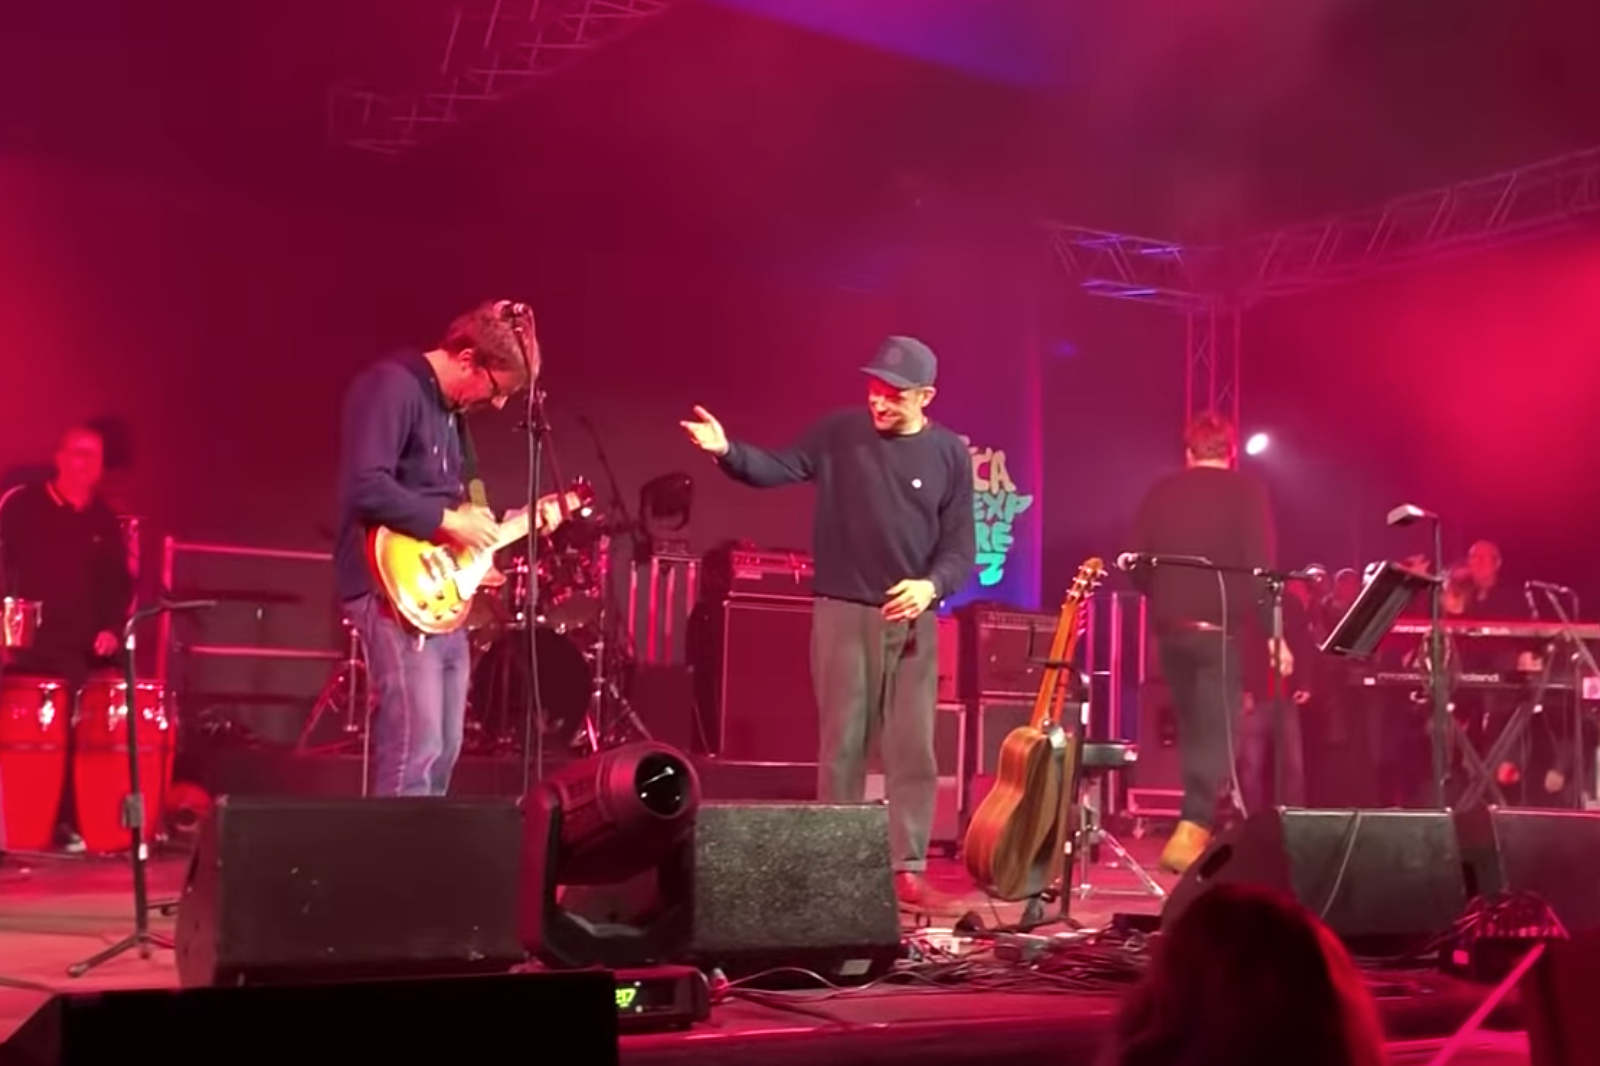 A surprise Blur reunion happened at the weekend...